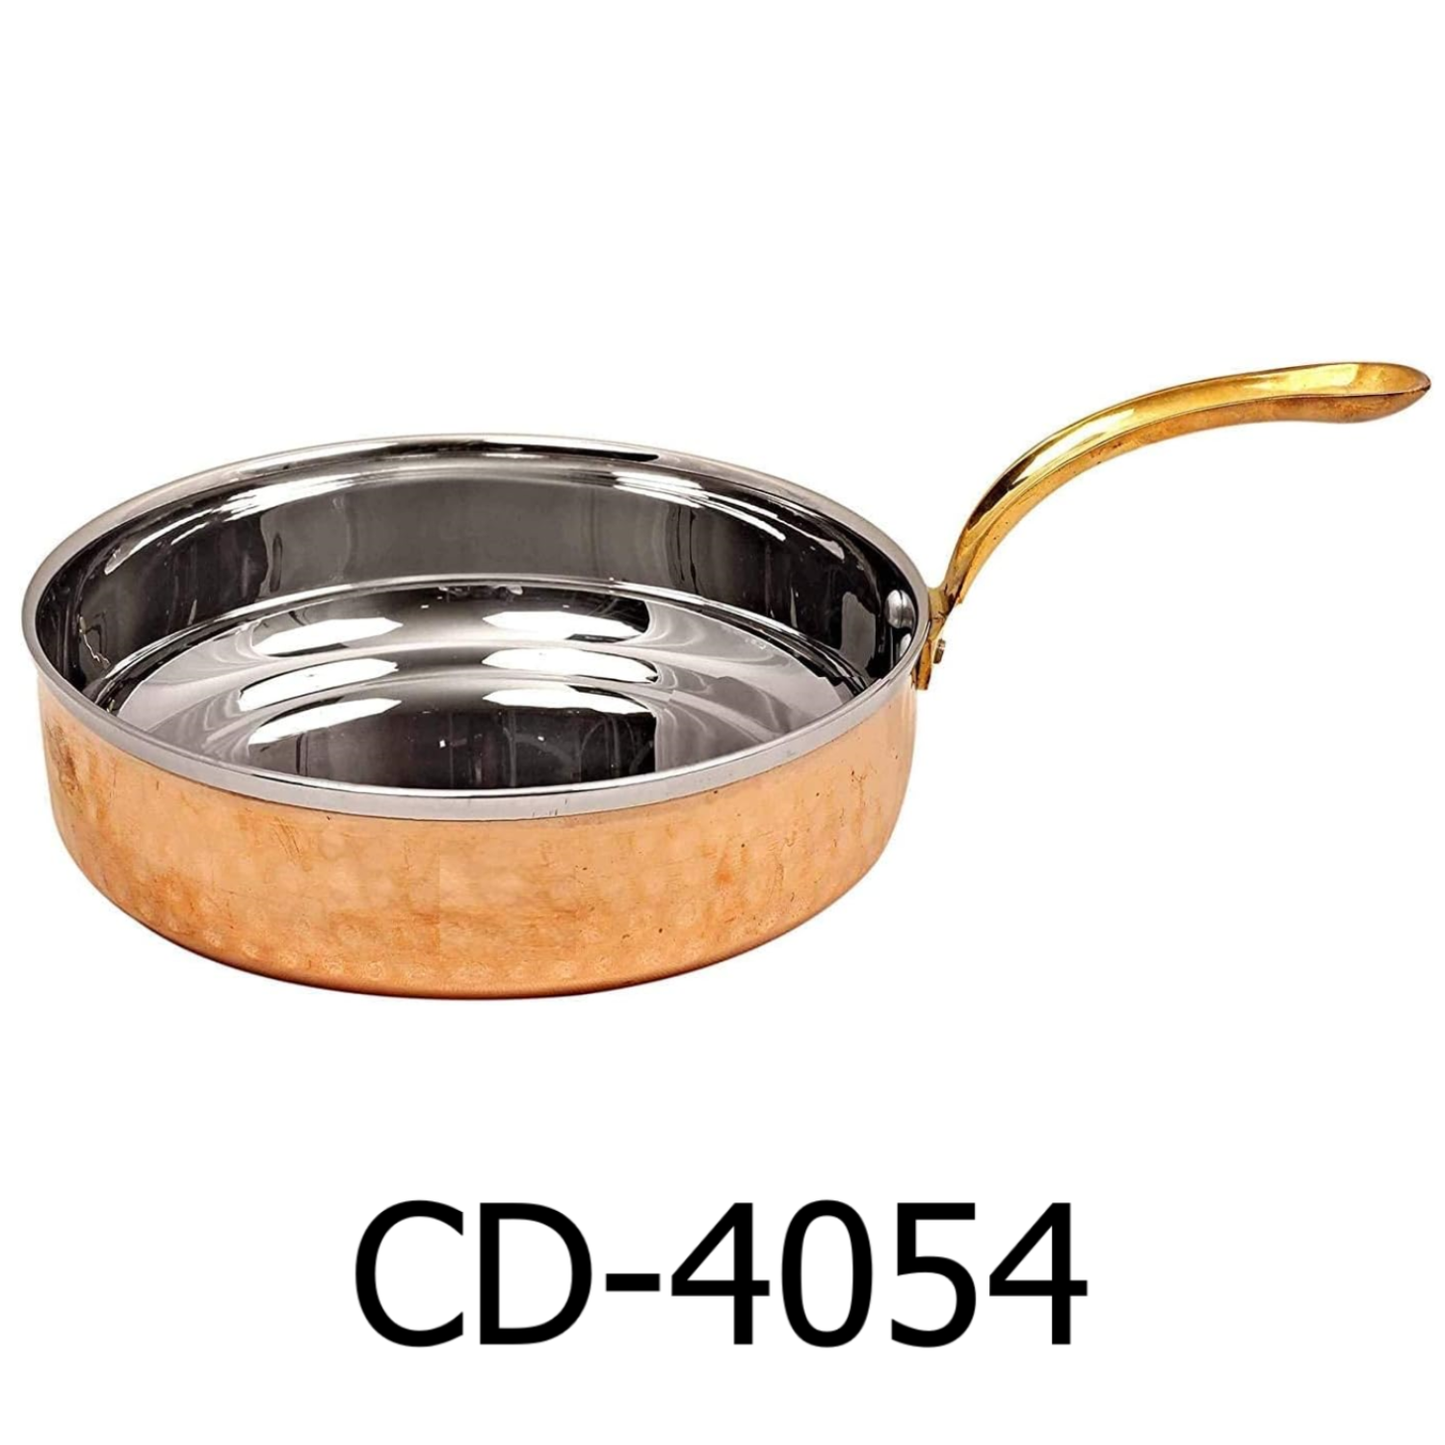 5" Copper/Stainless Steel Hammered Mini Fry Pan with Brass Handle